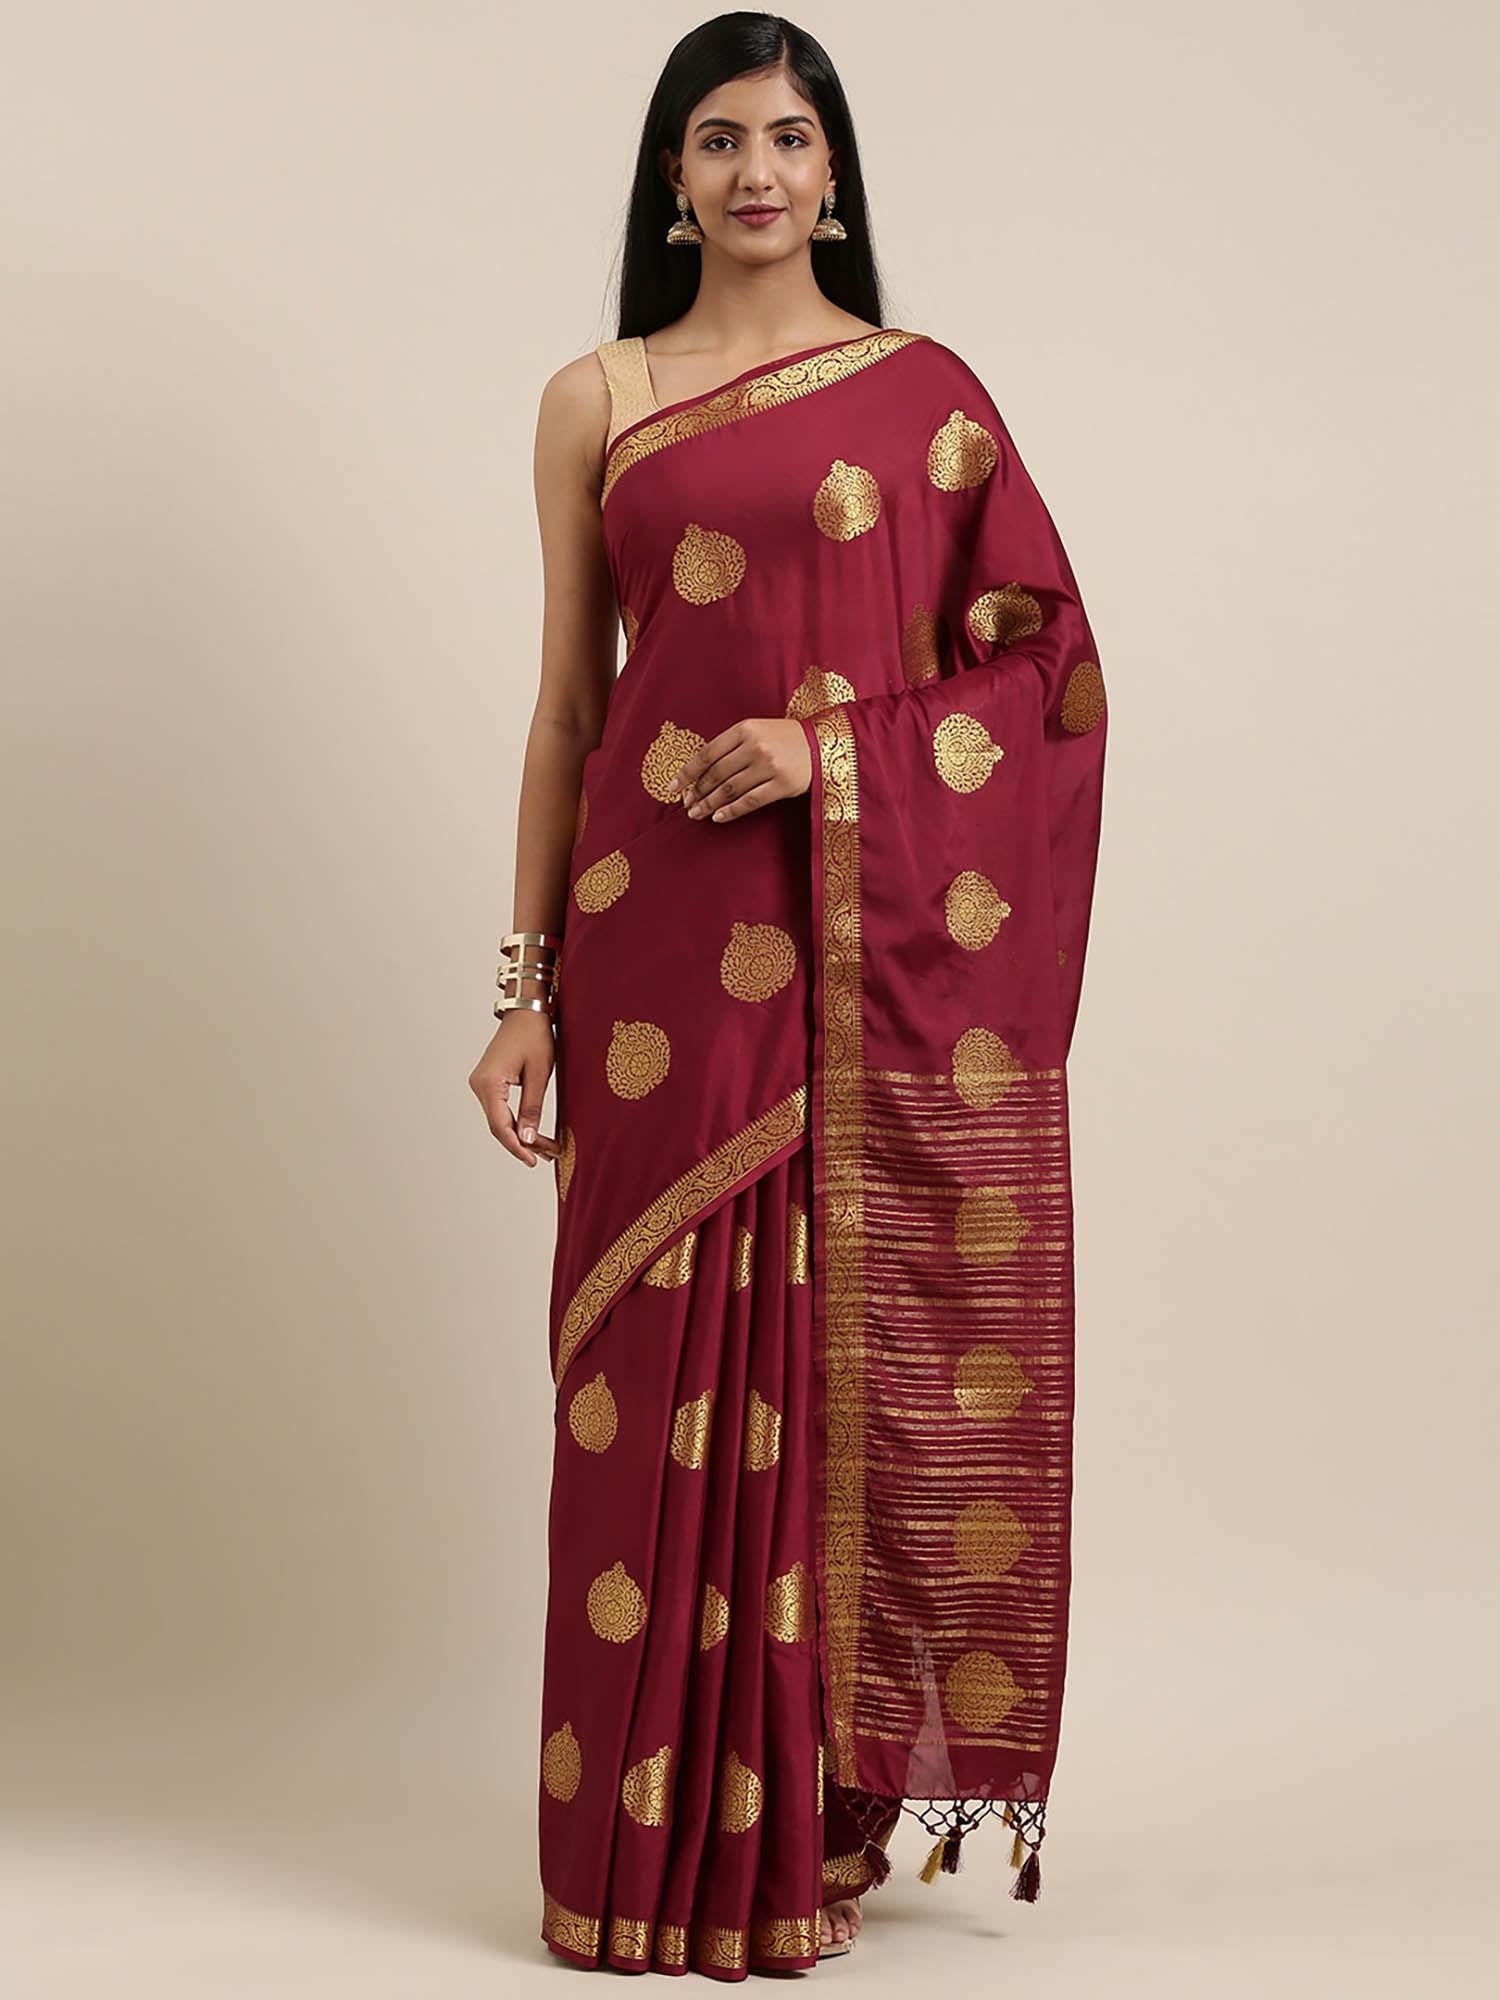 mysore-silk-style-crepe-saree-maroon-with-unstitched-blouse